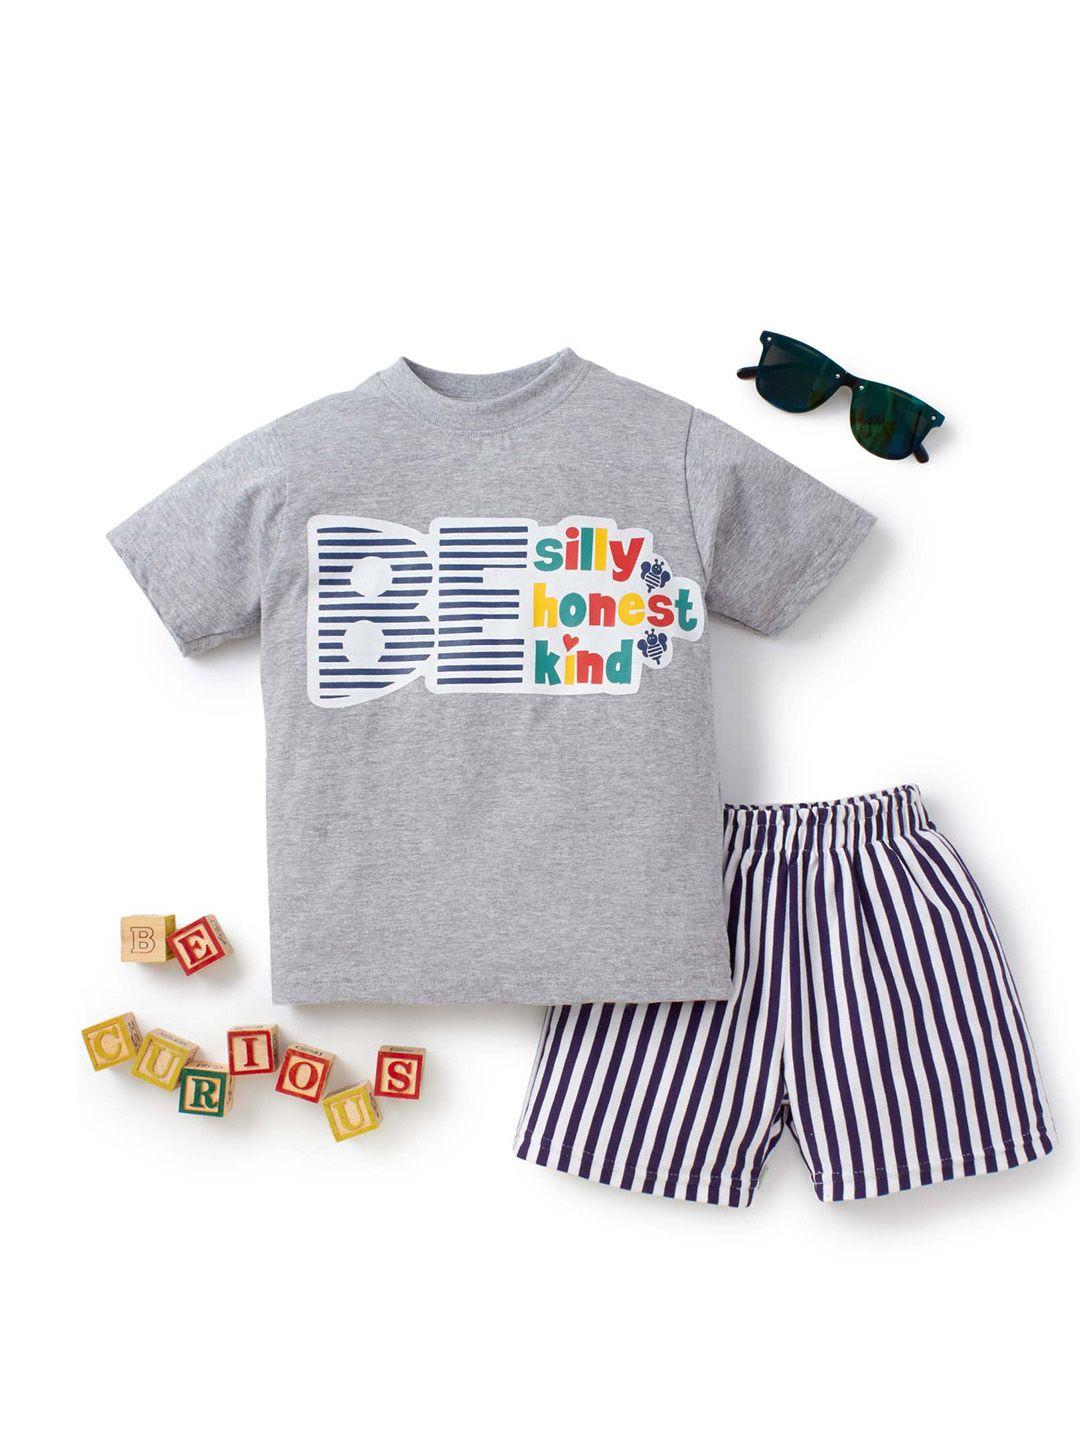 knit n knot boys printed t-shirt with shorts